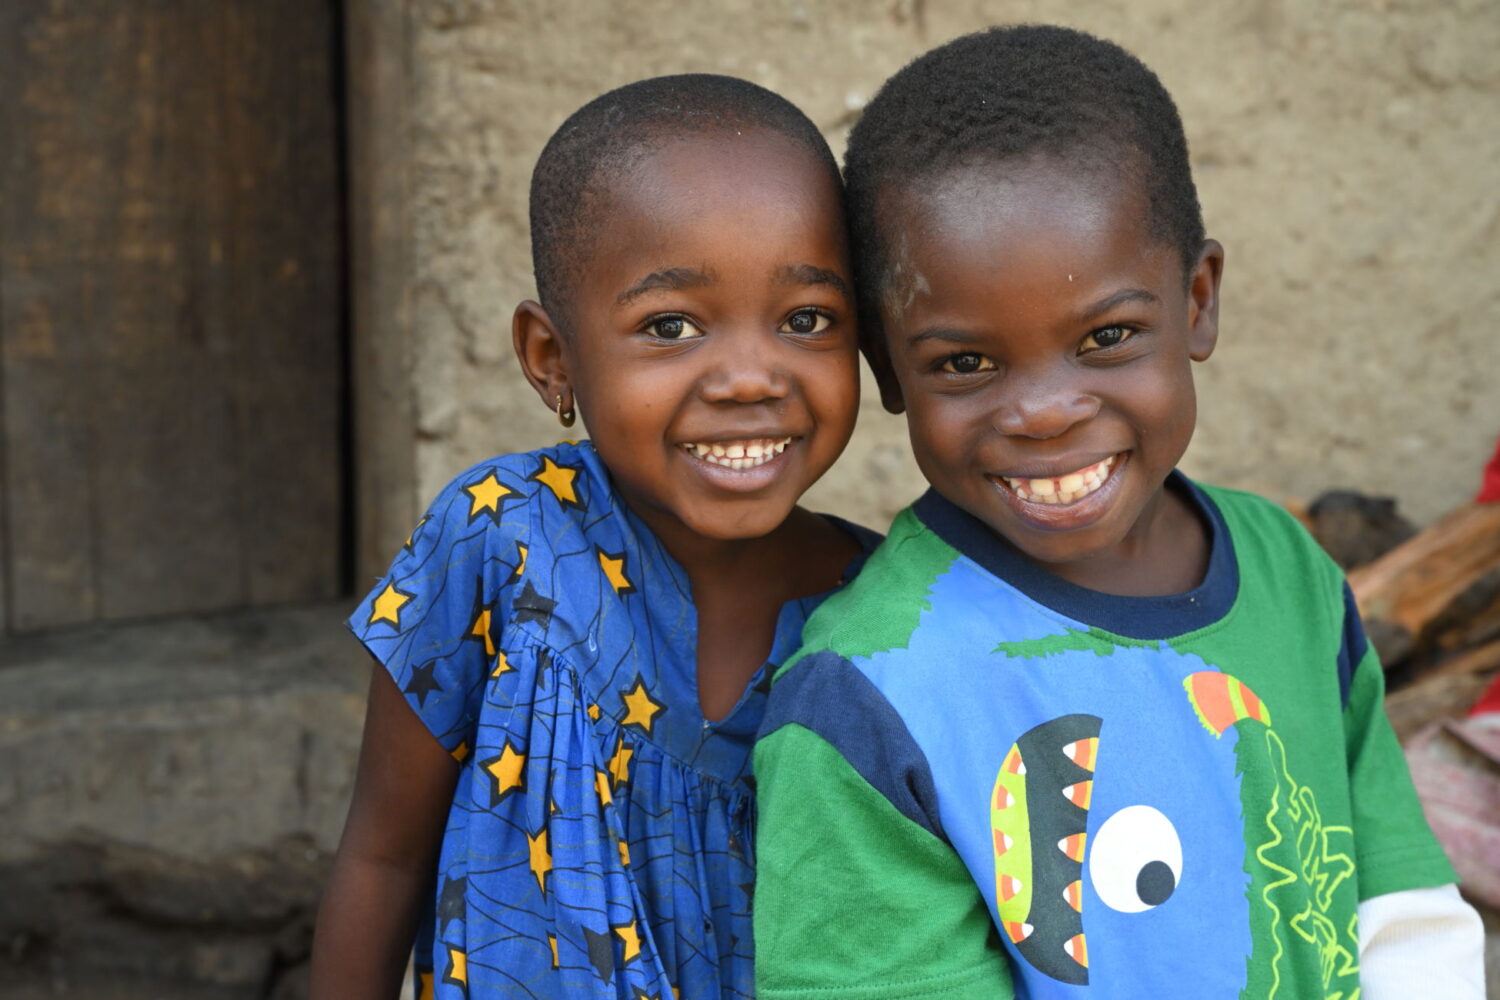 Two children smiling together in Santchou, in the West of Cameroon.